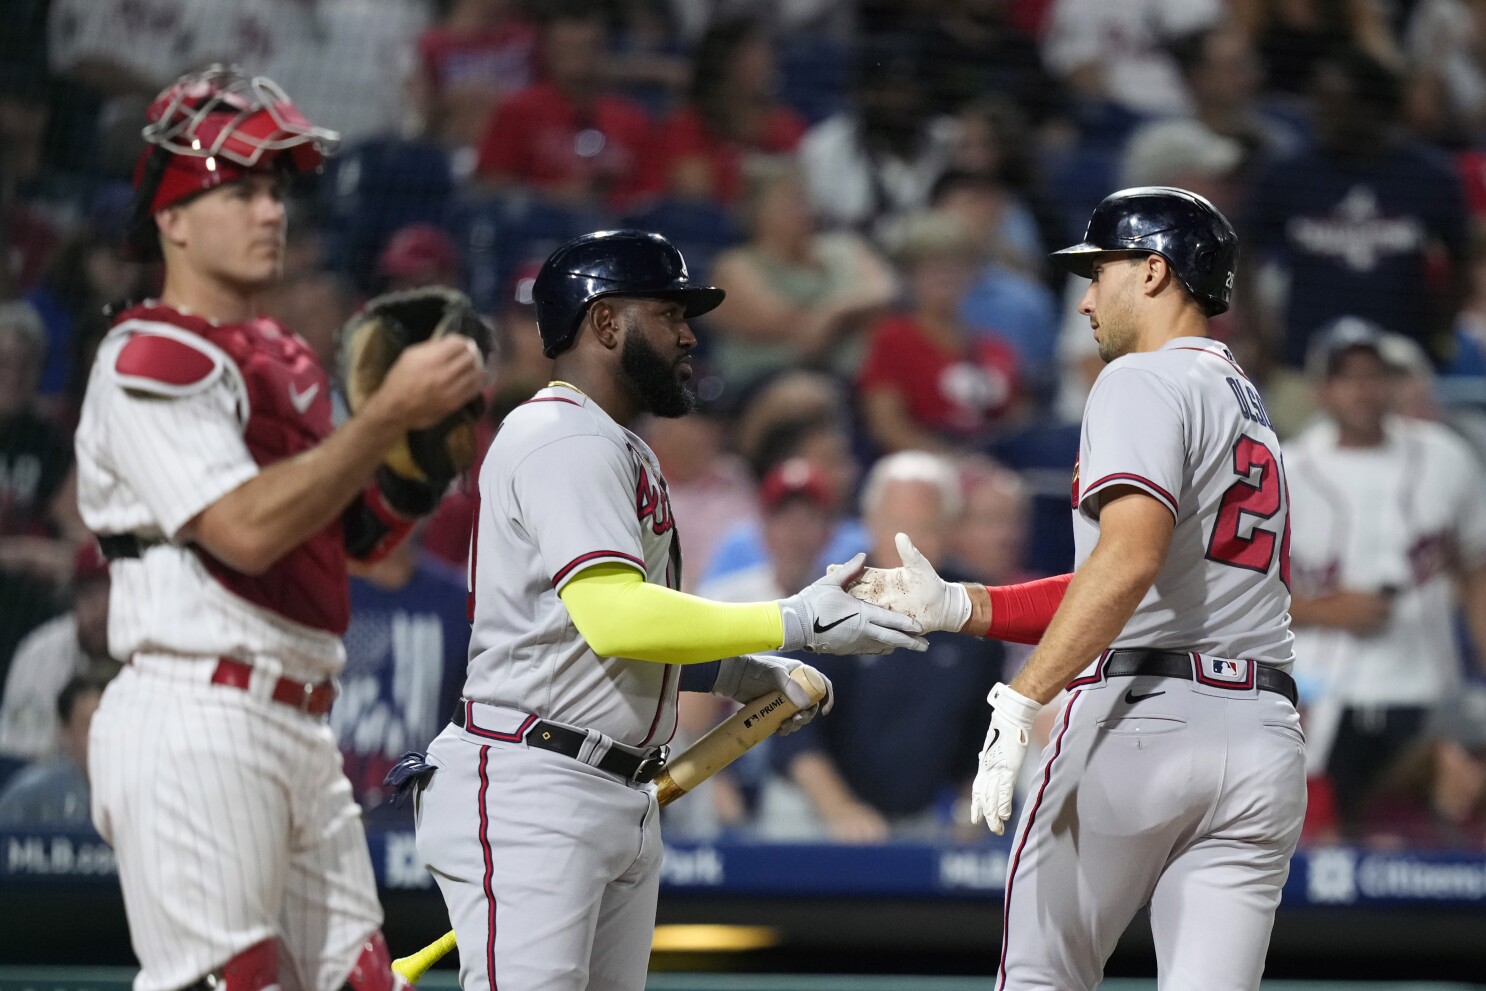 Late-night magic: Braves beat Dodgers 5-4, lead NLCS 2-0